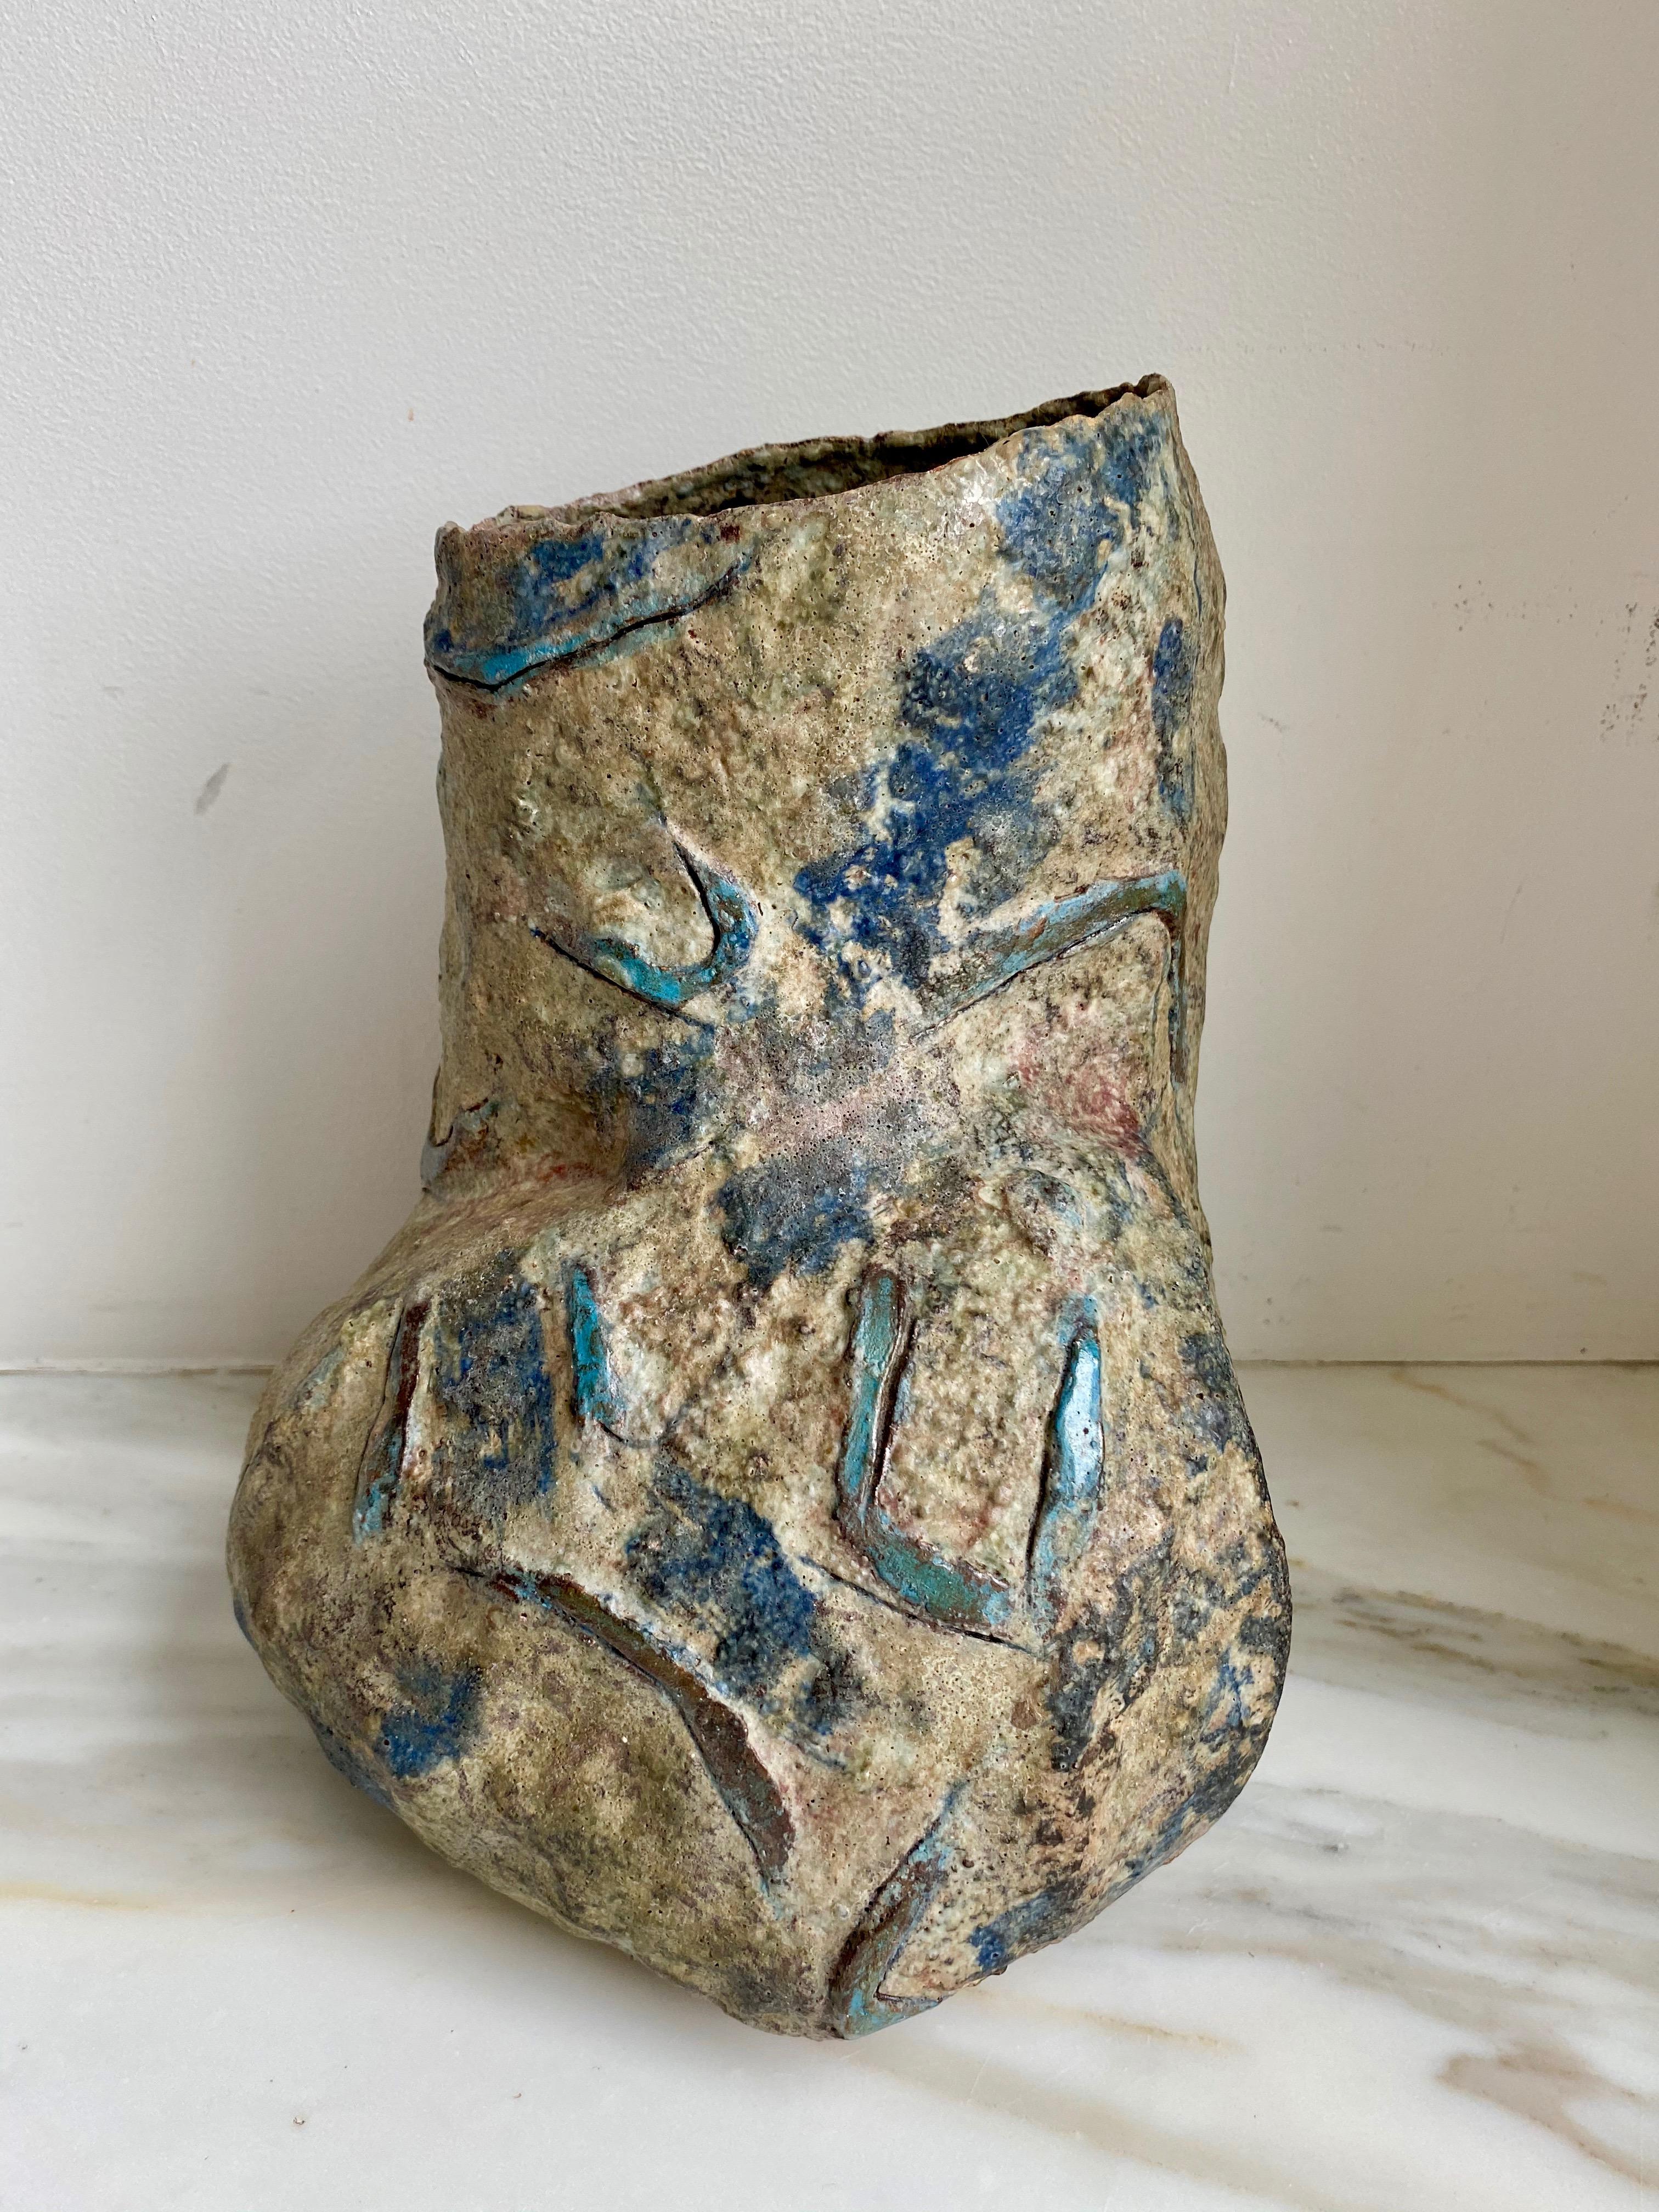 Asymmetrical sculptural stoneware vessel with rough and uneven surface and incised blue geometric symbols 

Hand-built by Sara Radstone

Great Britain, 1990s.